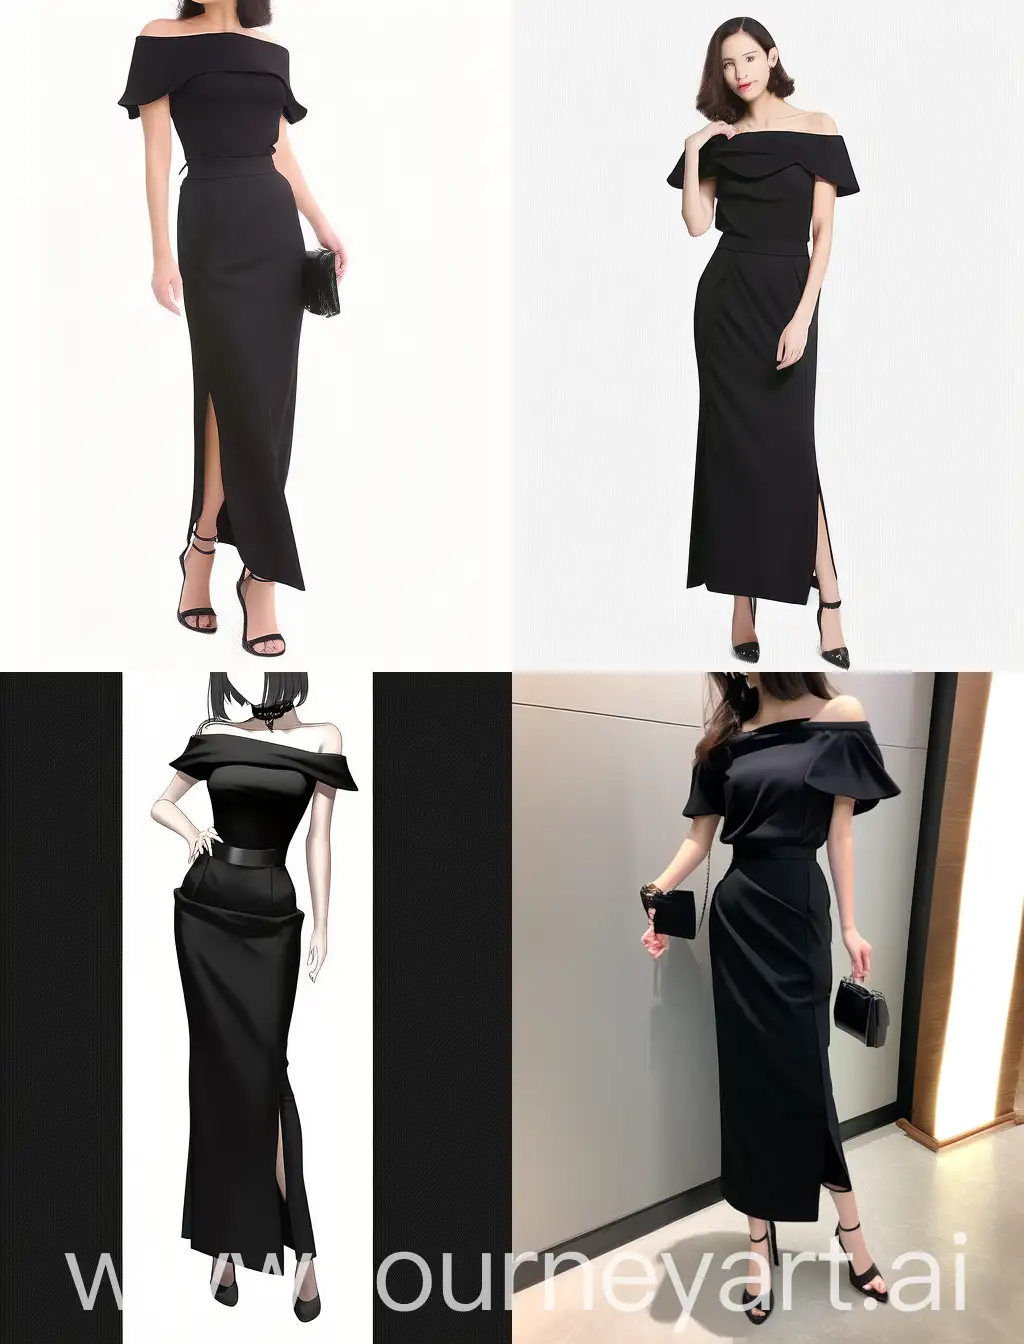 Long black fit pencil skirt maxi dress with a decollete collar, 4 Horizontal folds on waist, satin, slit to Middle of thigh, 10 centimeter Simple offshoulder Double layered short sleeves above elbow